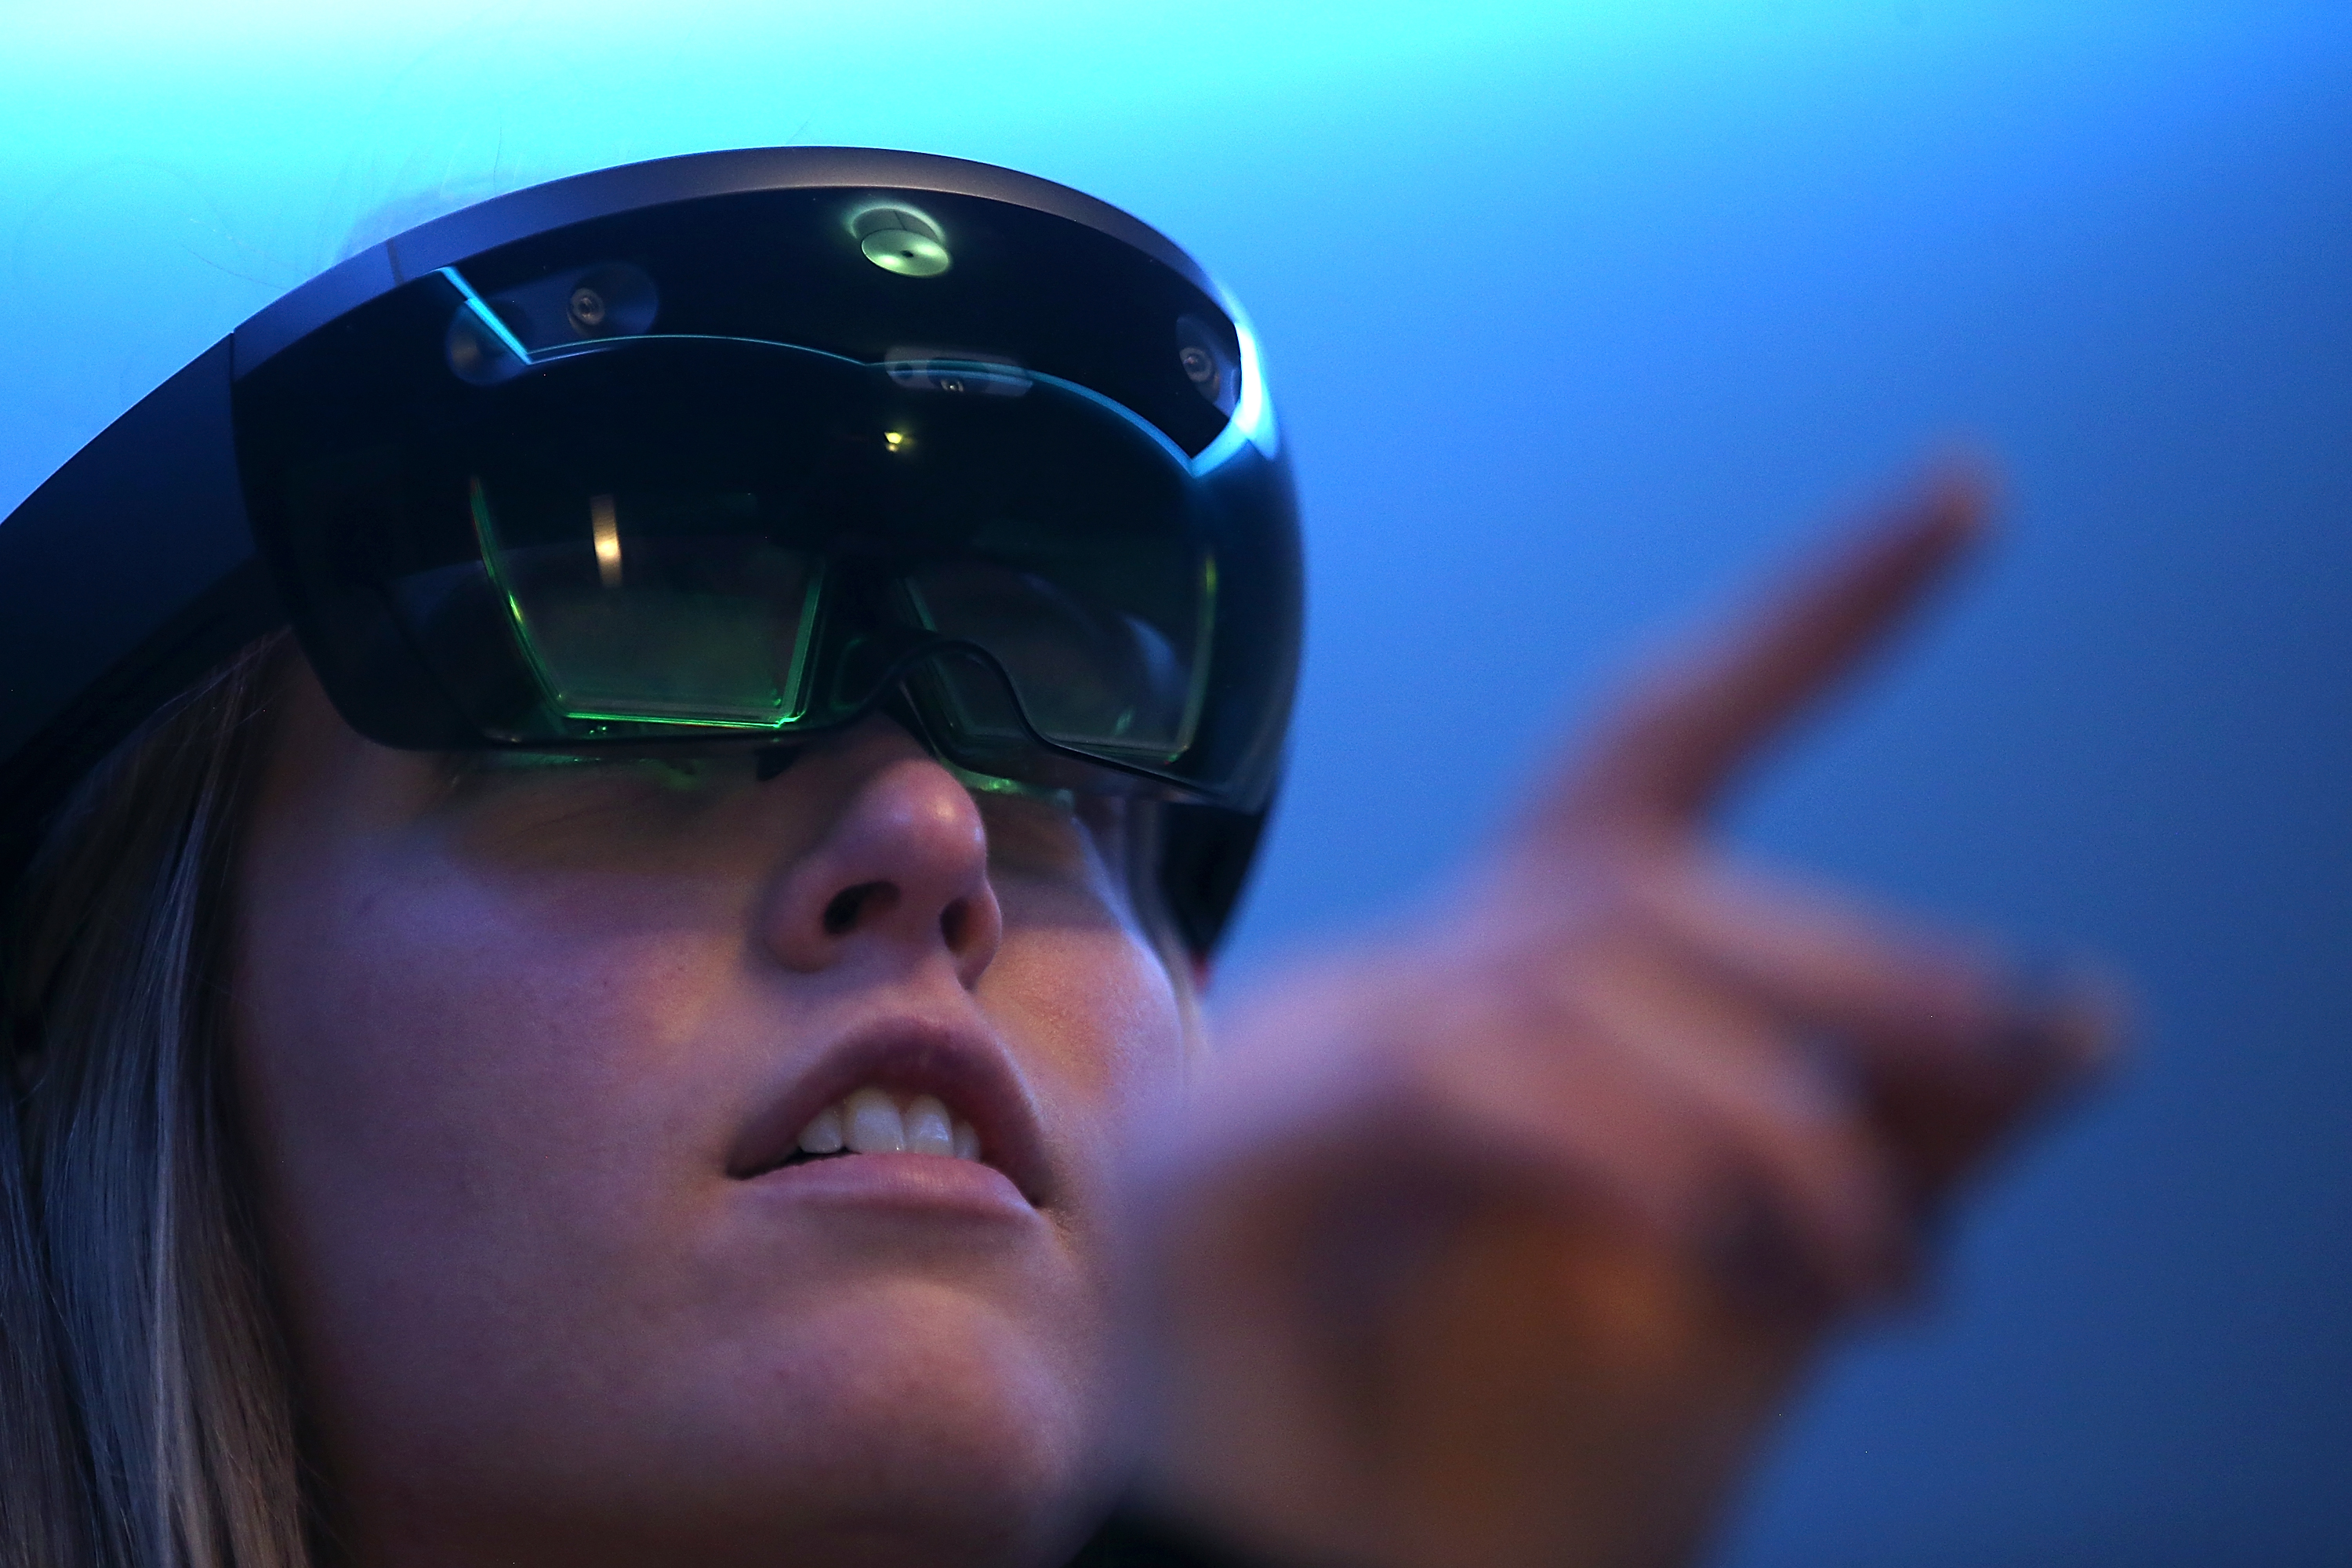 Microsoft employee Gillian Pennington demonstrates the Microsoft HoloLens augmented reality (AR) viewer during the 2016 Microsoft Build Developer Conference on March 30, 2016 in San Francisco, California. (Justin Sullivan&mdash;Getty Images)